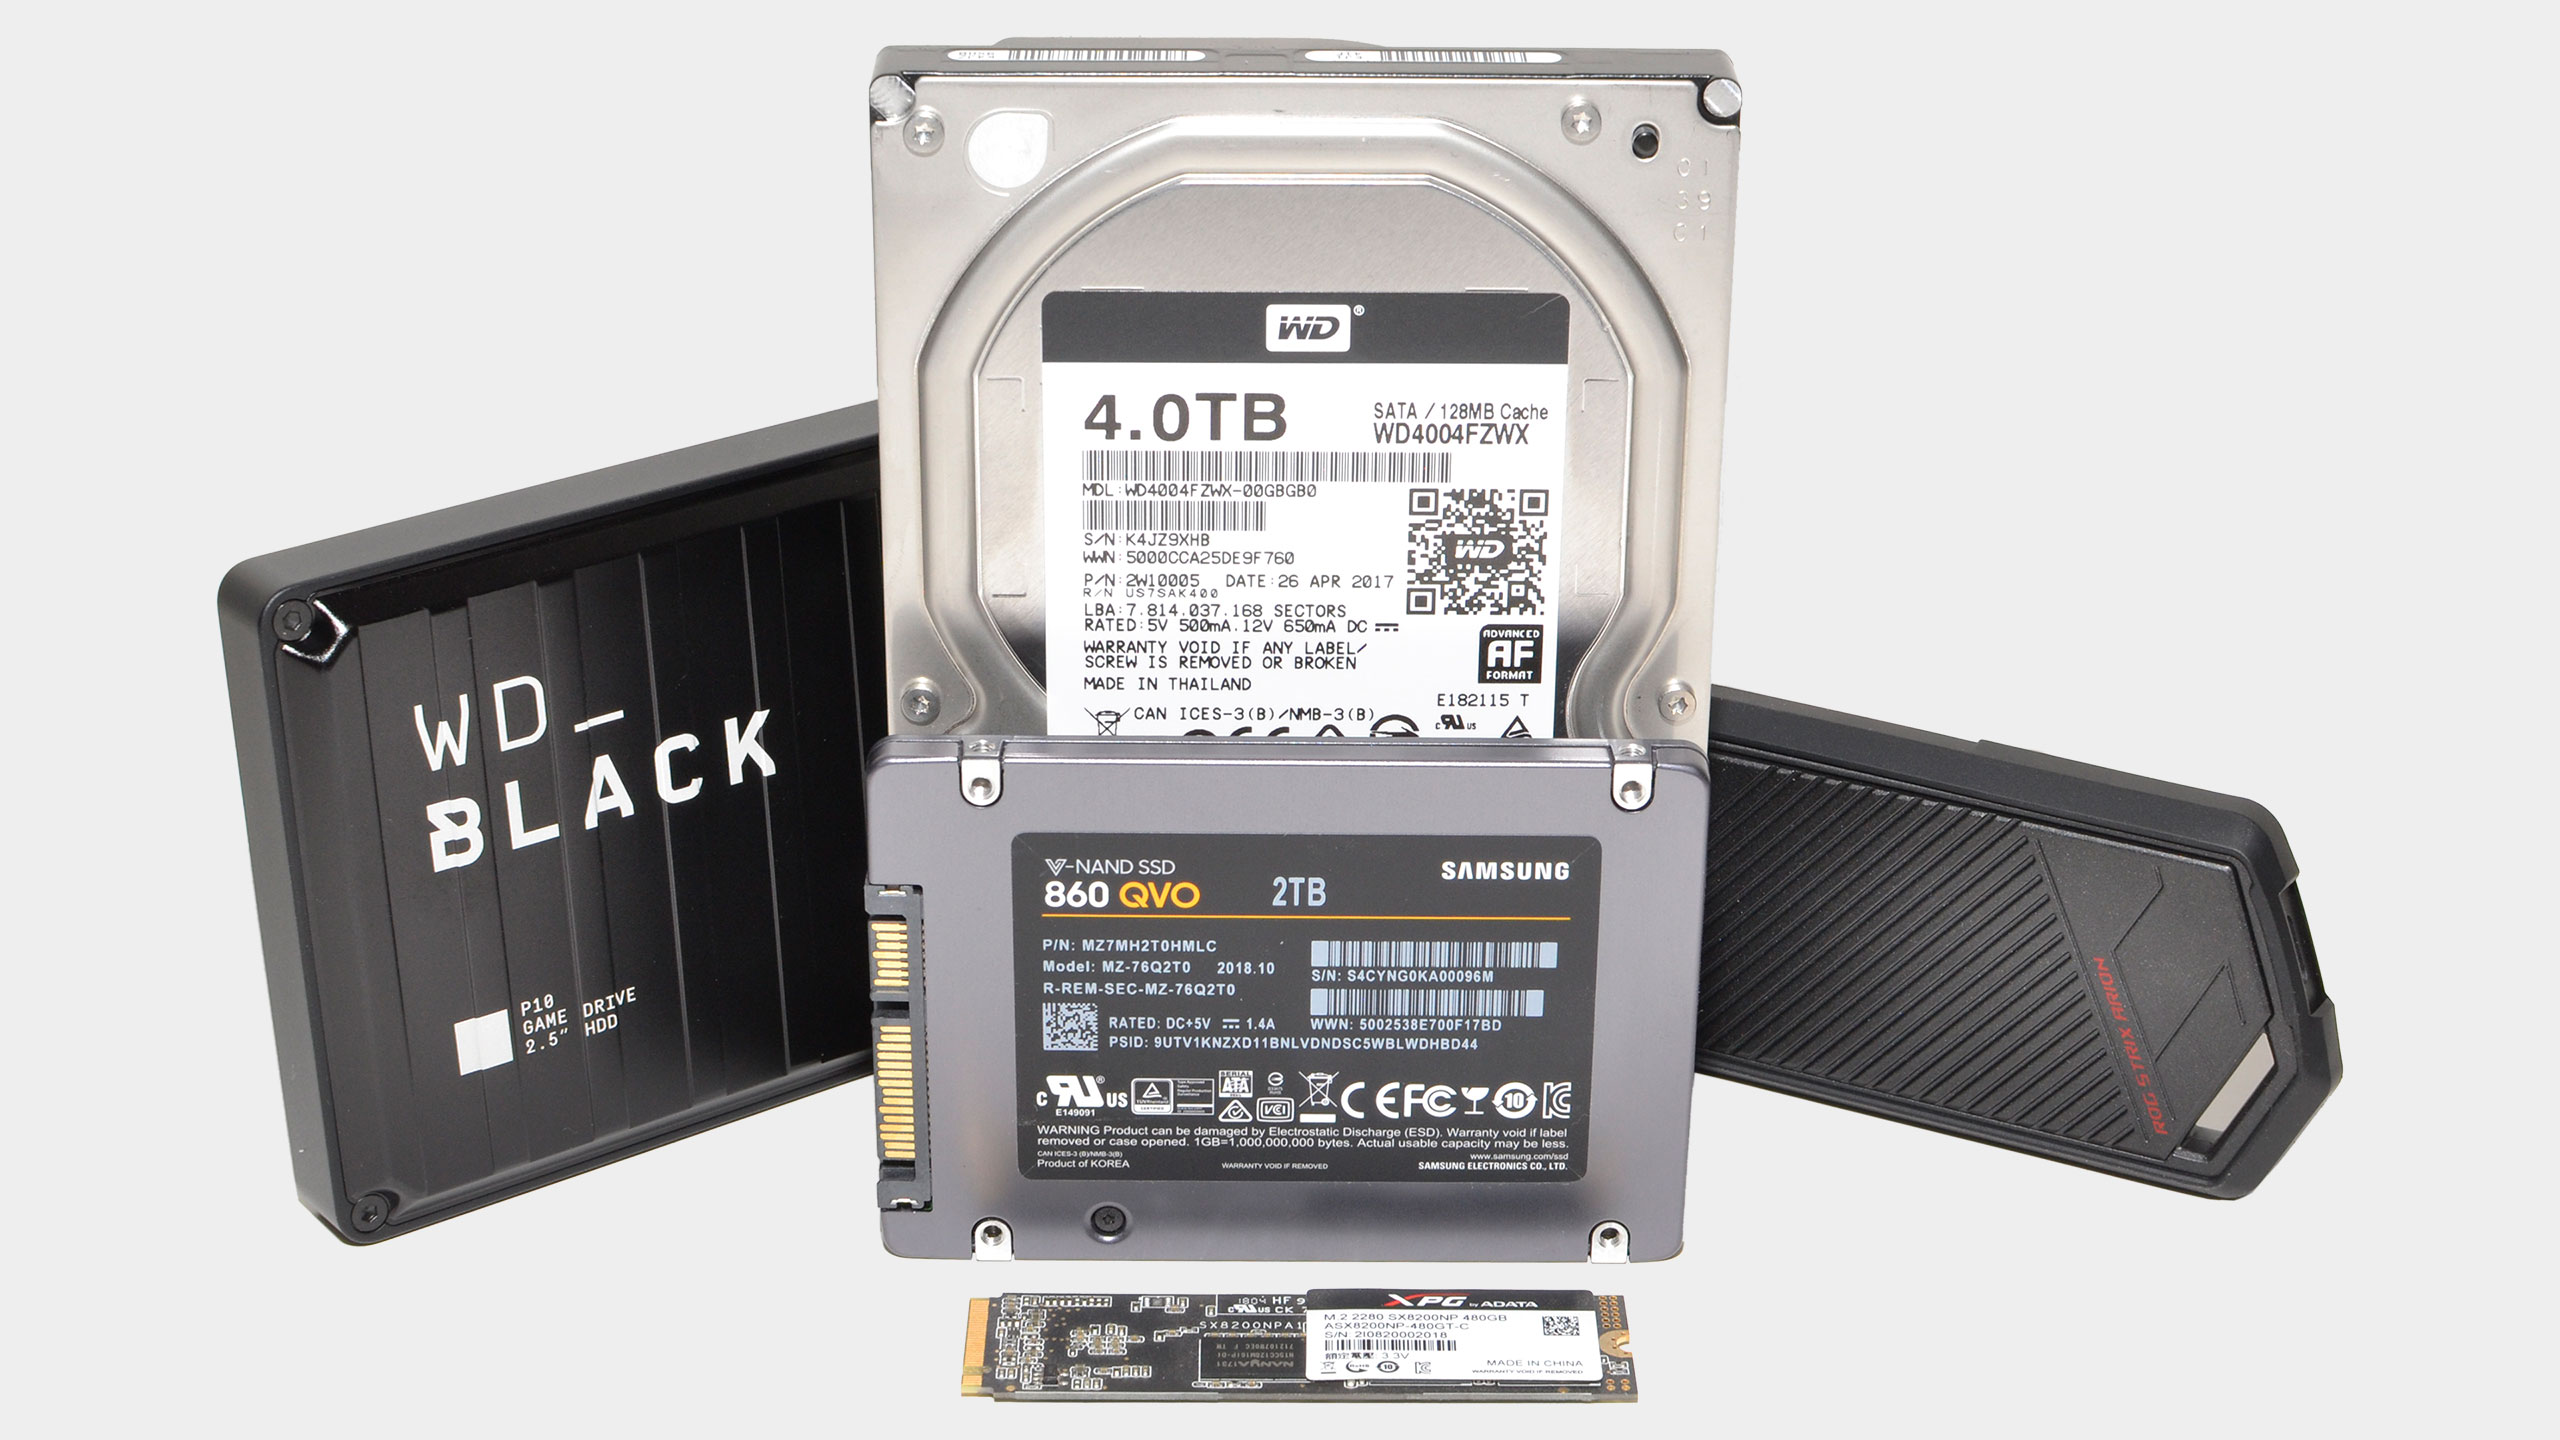 HDD vs SSD - which is the storage tech for | PC Gamer